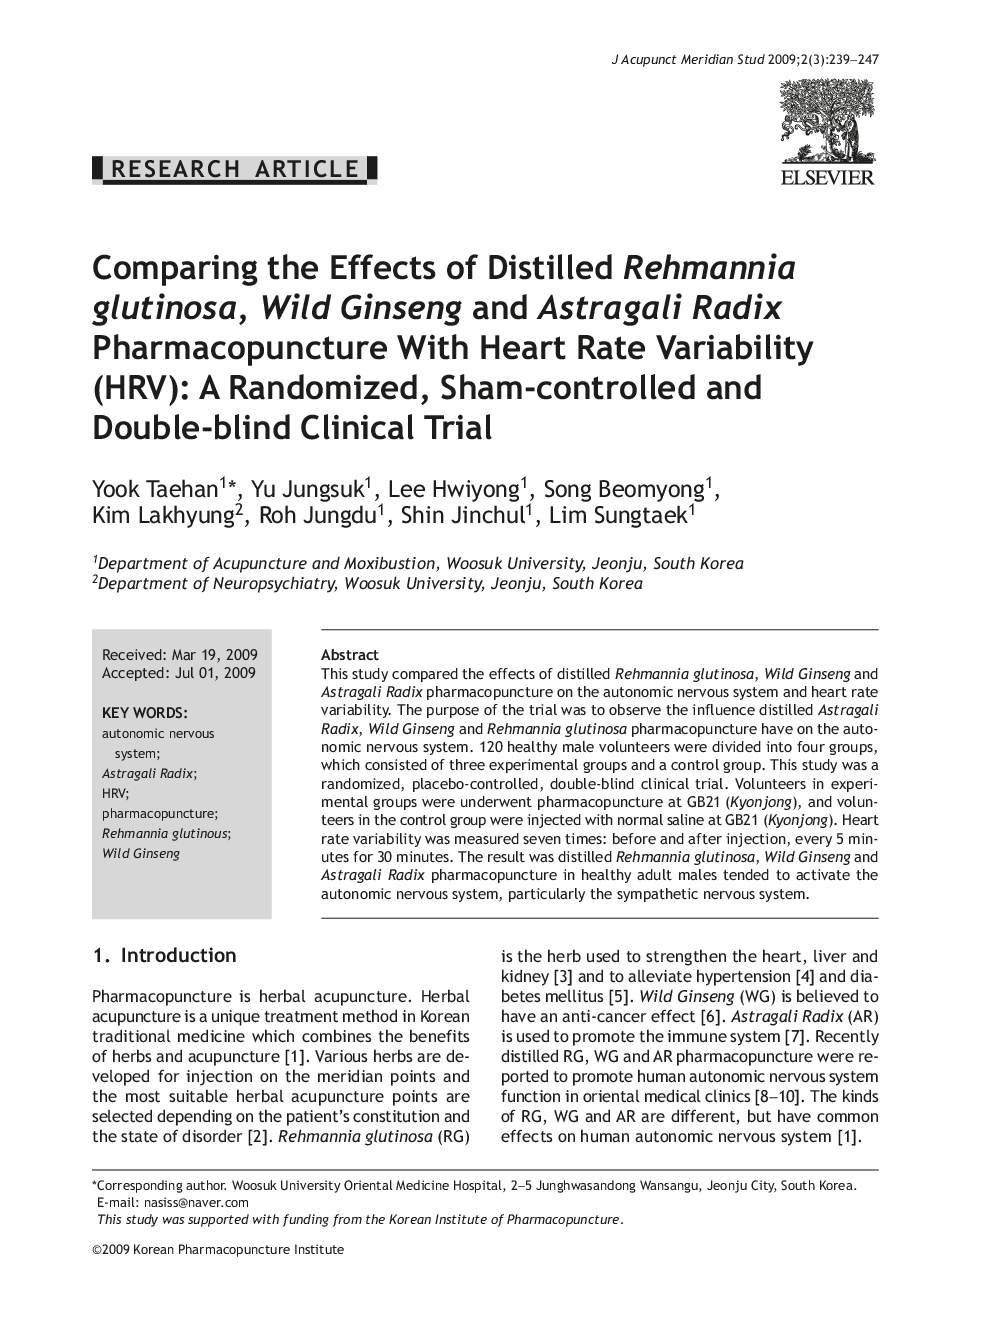 Comparing the Effects of Distilled Rehmannia glutinosa, Wild Ginseng and Astragali Radix Pharmacopuncture With Heart Rate Variability (HRV): A Randomized, Sham-controlled and Double-blind Clinical Trial 